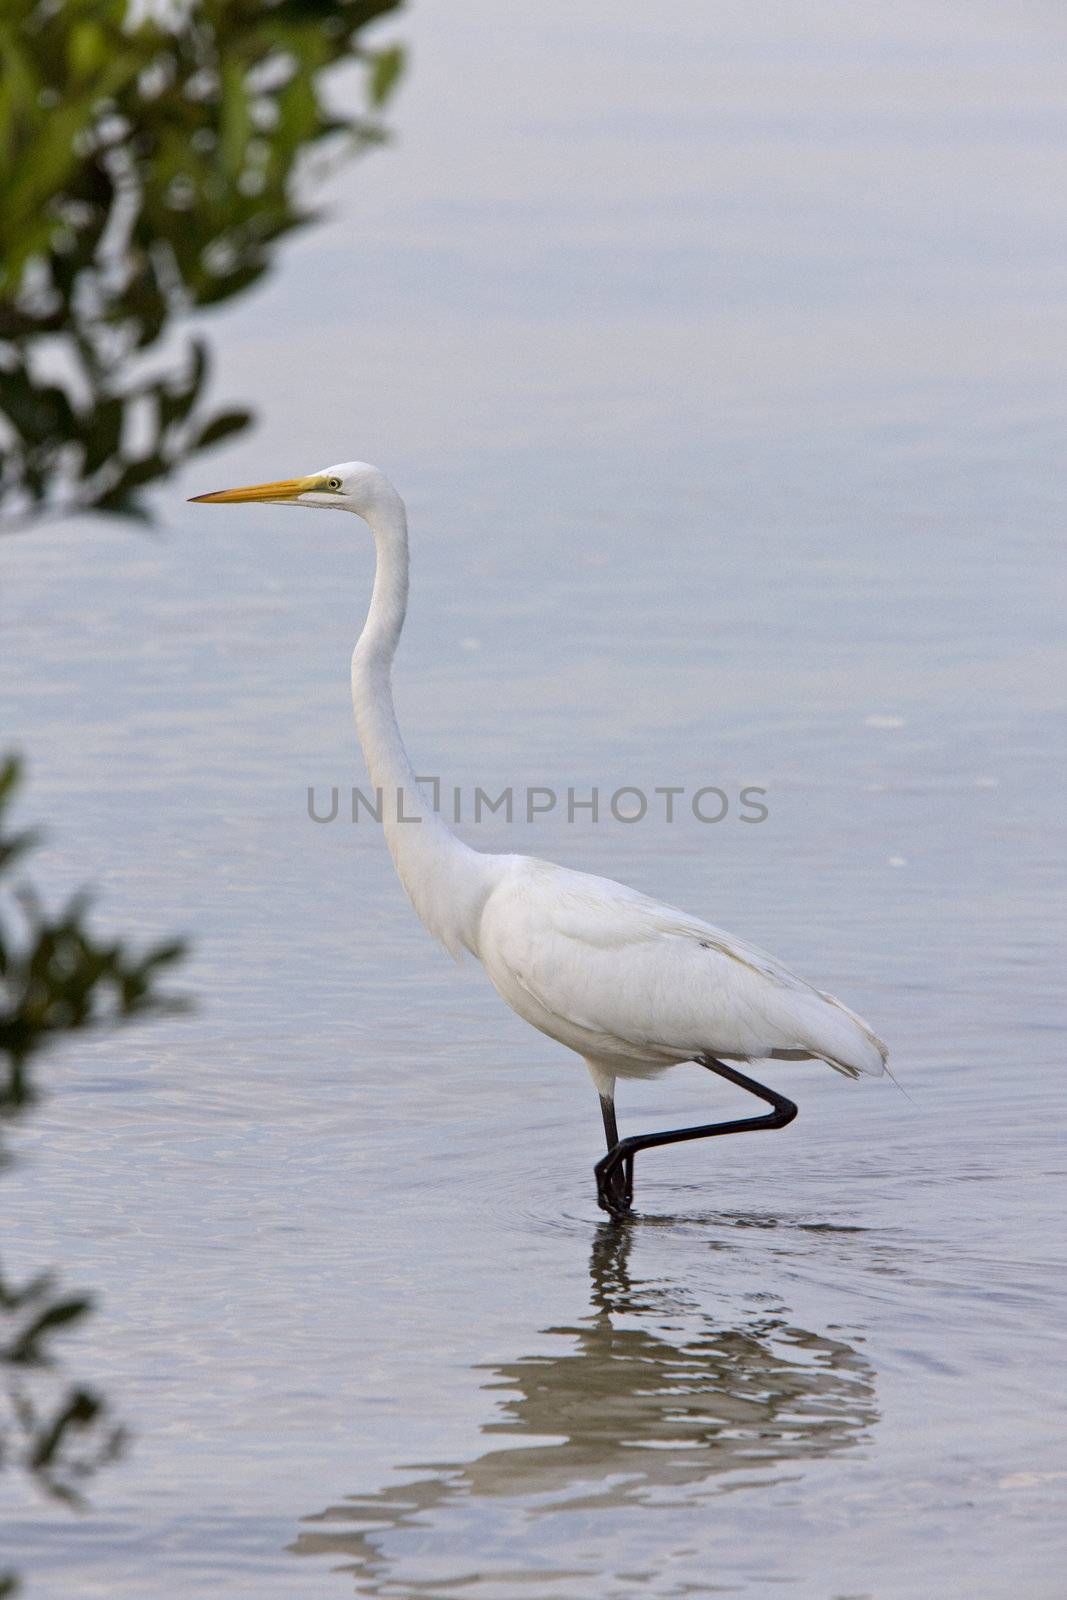 Great White Egret wading in Florida waters by pictureguy